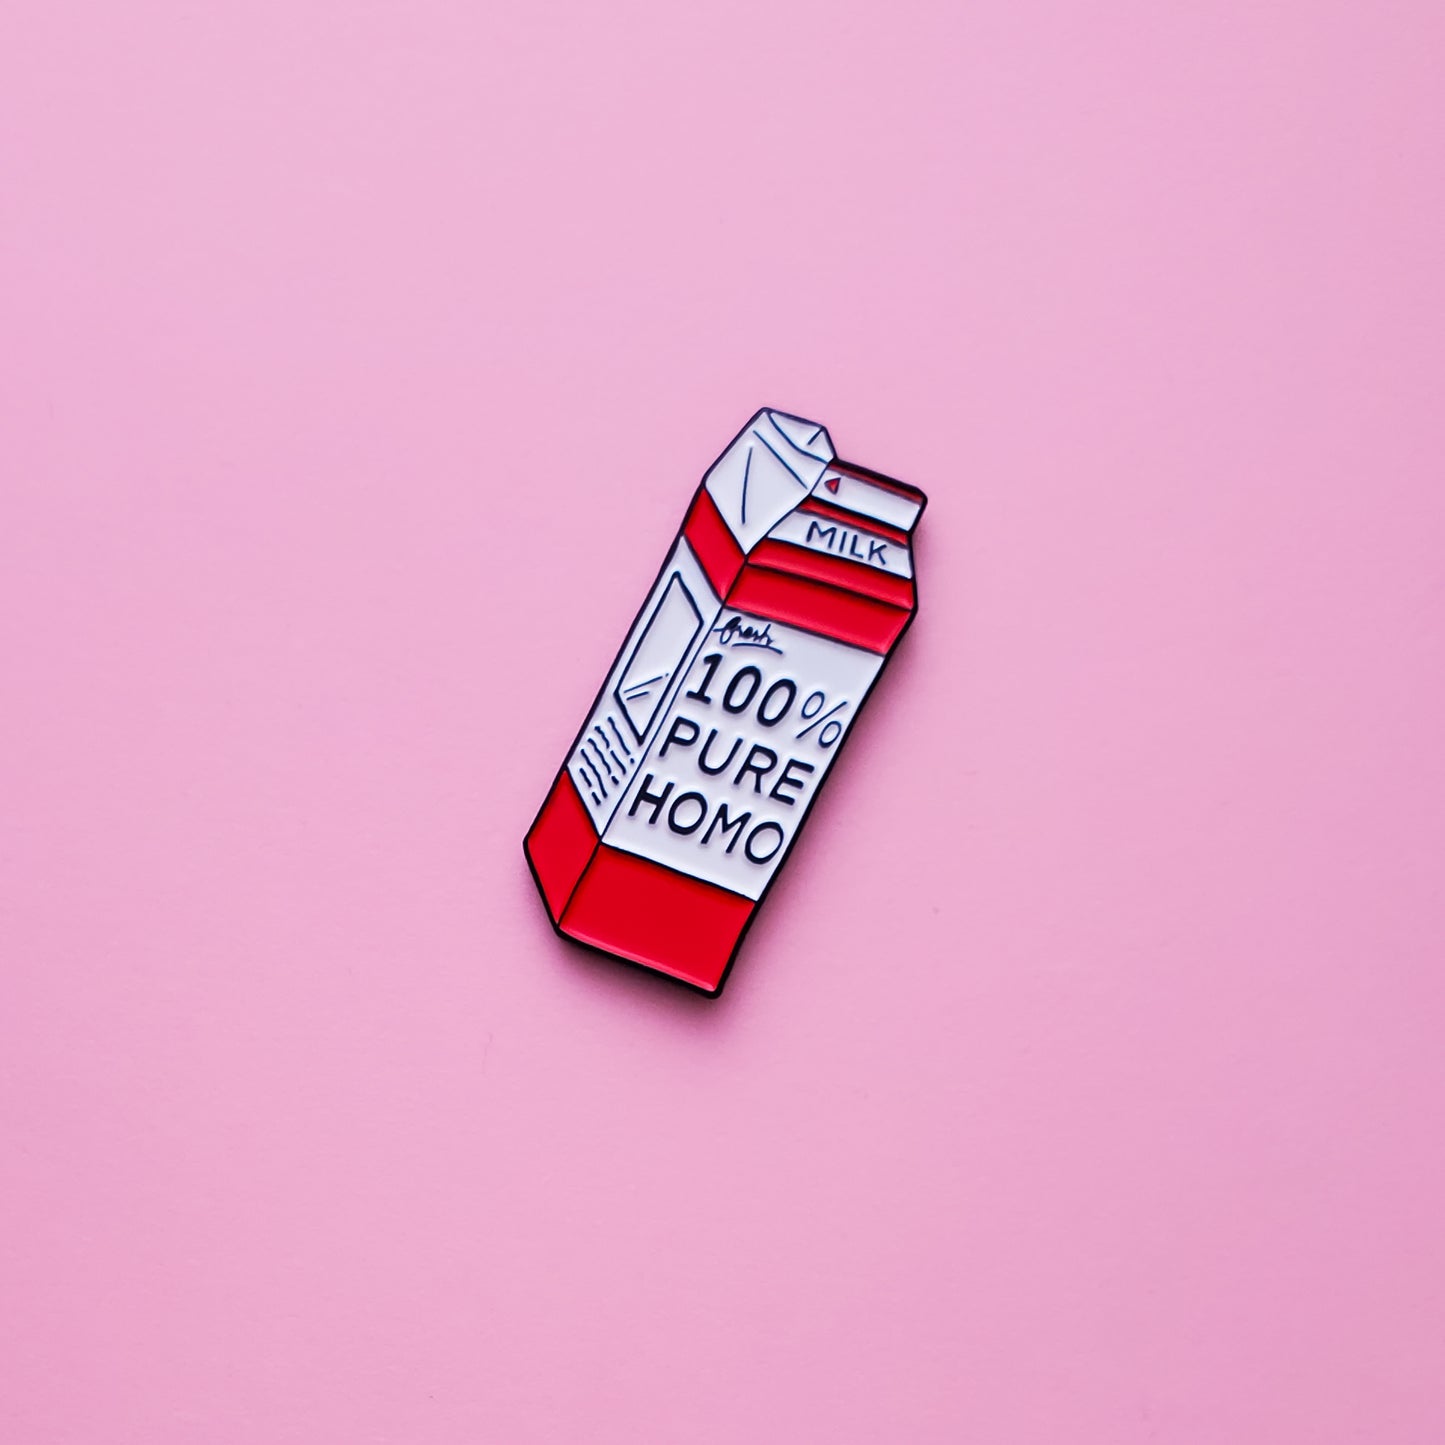 This red and white Milk-Carton shaped enamel pin features the words '100% pure homo' set on a pink background. Homo Milk Pin For Sale - LGBTQ Pride Pin Canada  | Little Rainbow Paper Co